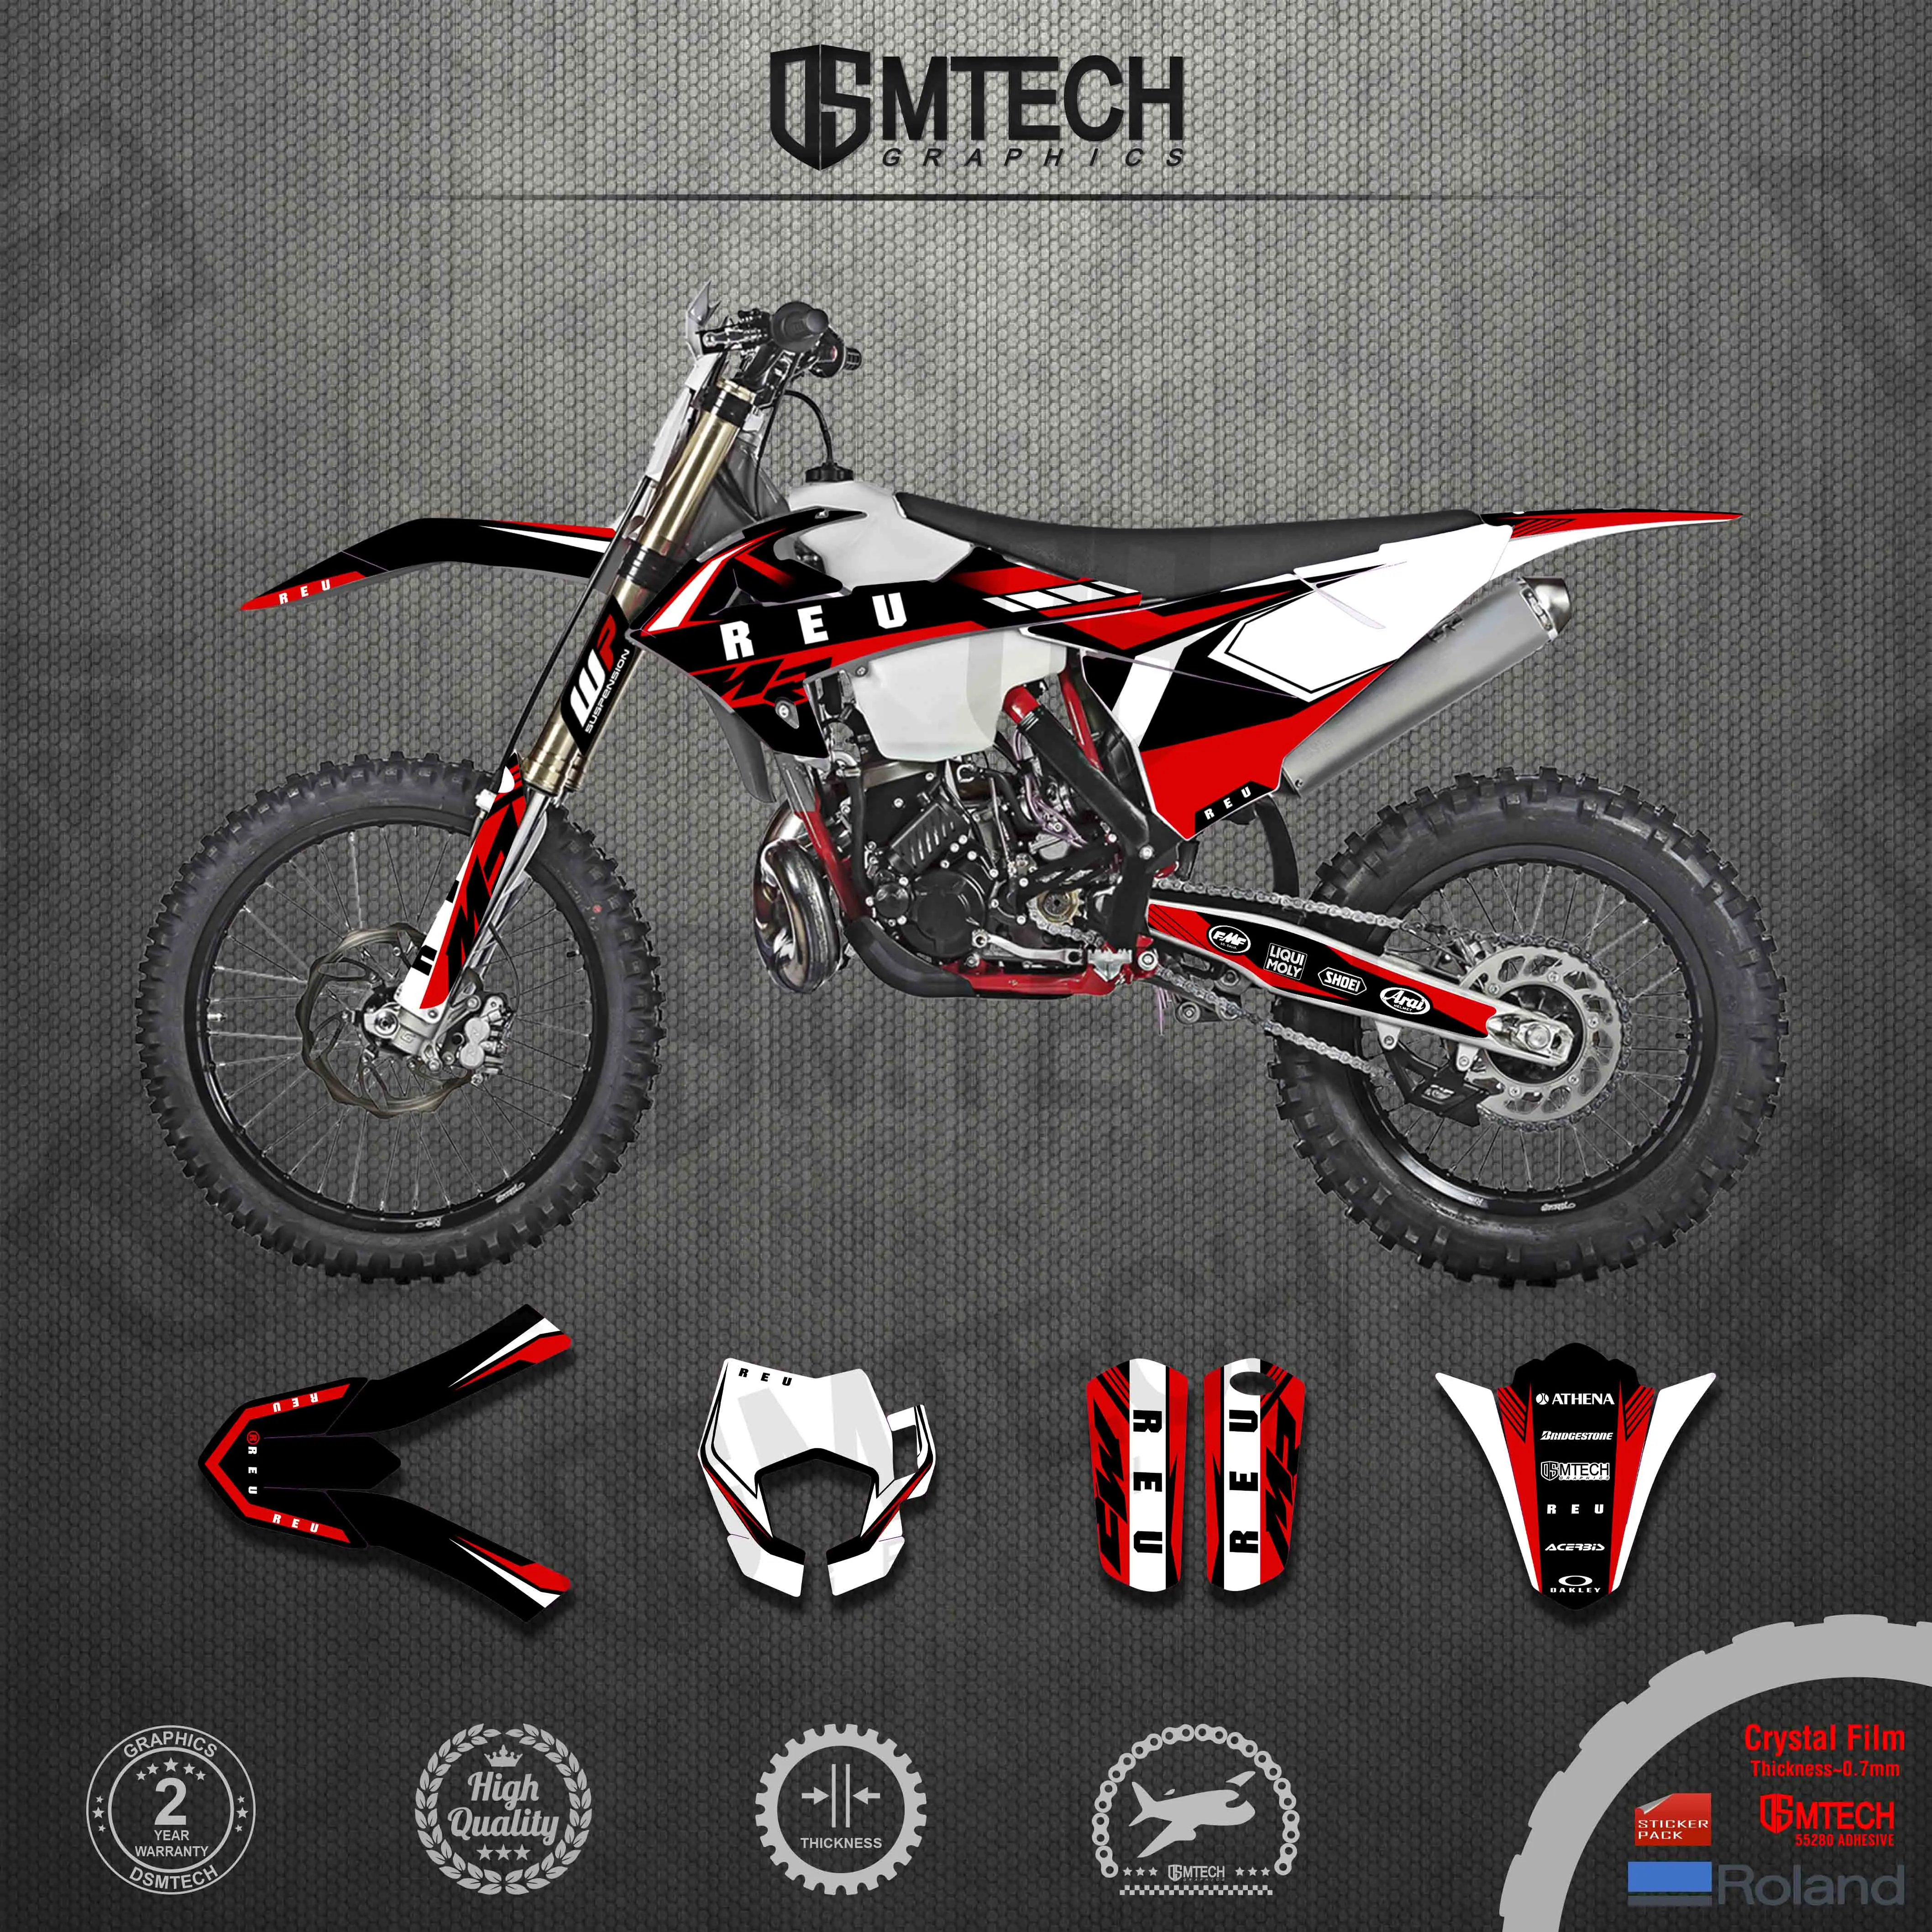 

DSMTECH Motorcycle Team Backgrounds Graphics Stickers Decals Kits For RIEJU 2021 2022 MR300 MR PRO 001